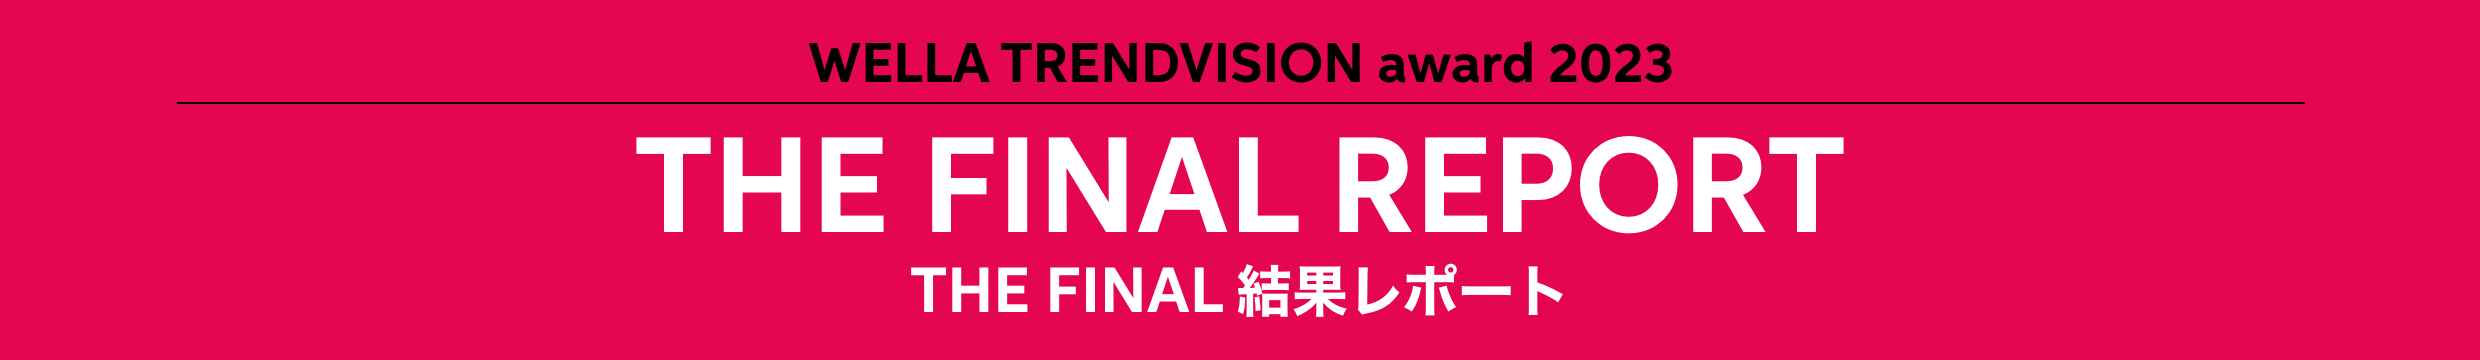 WELLA TRENDVISION award 2023 THE FINAL REPORT THE FINAL 結果レポート